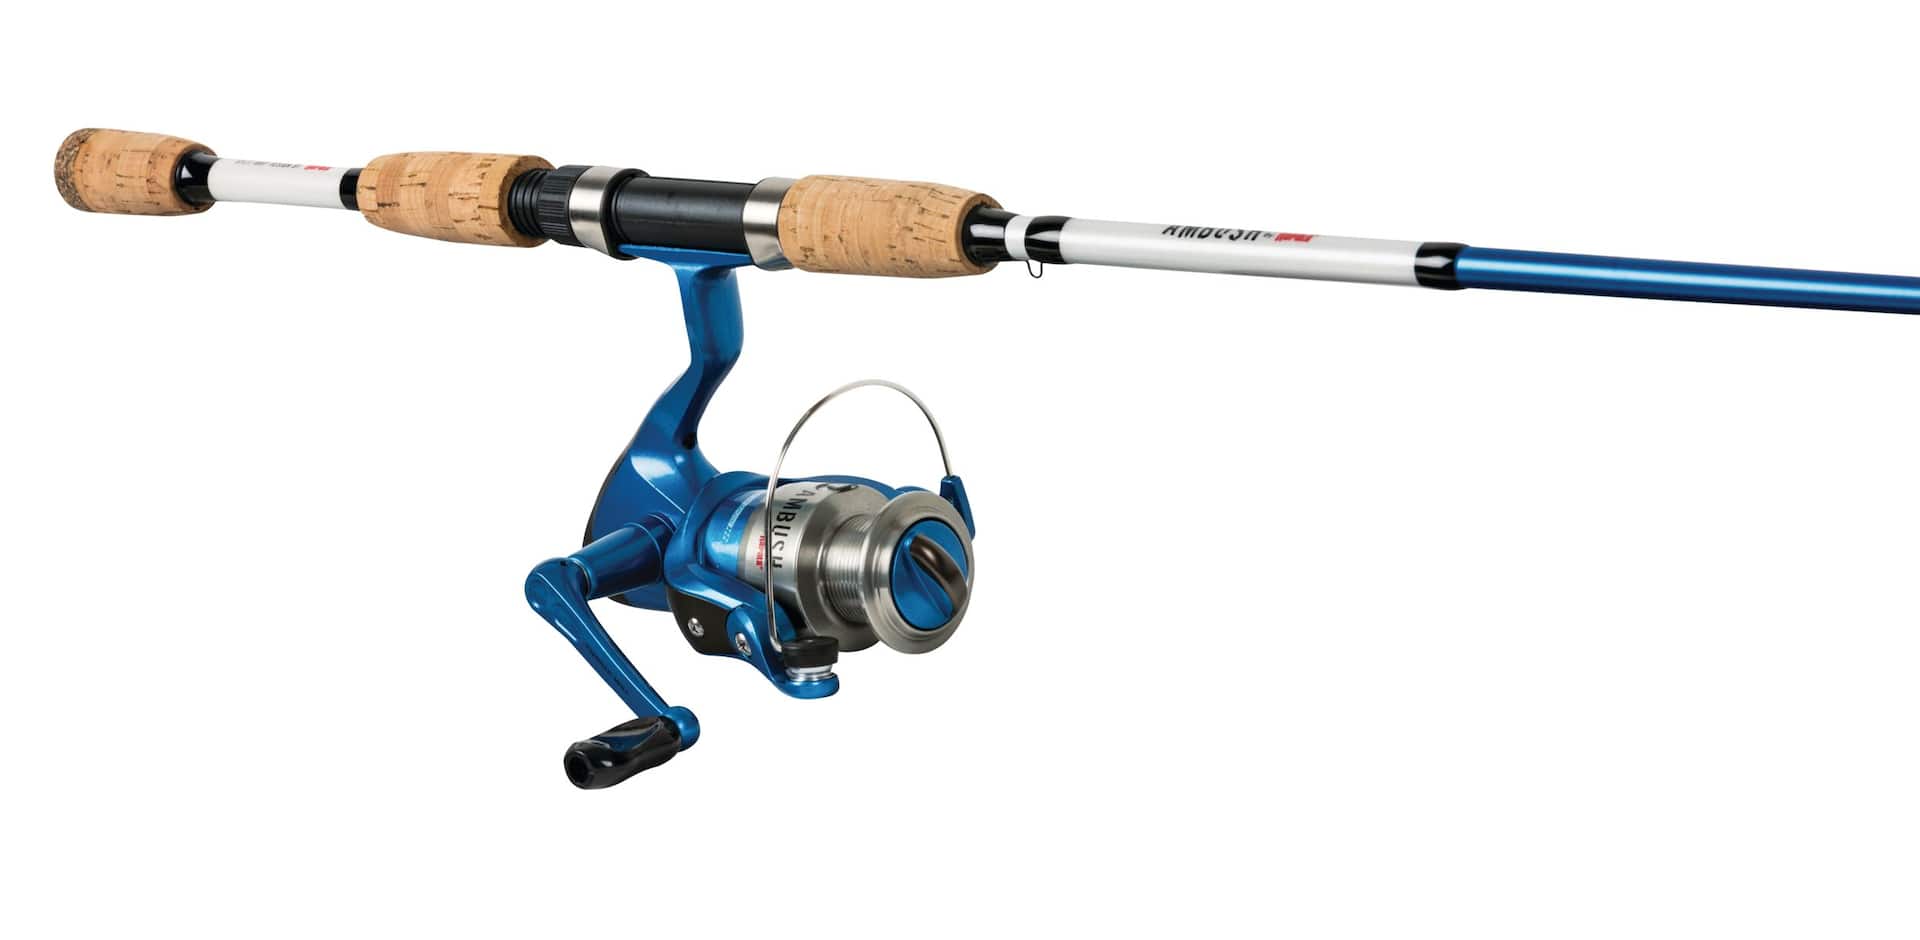 Zebco Quantum Conquer Spinning Fishing Rod and Reel Combo, Anti-Reverse,  Medium-Light, 6.6-ft, 3-pc